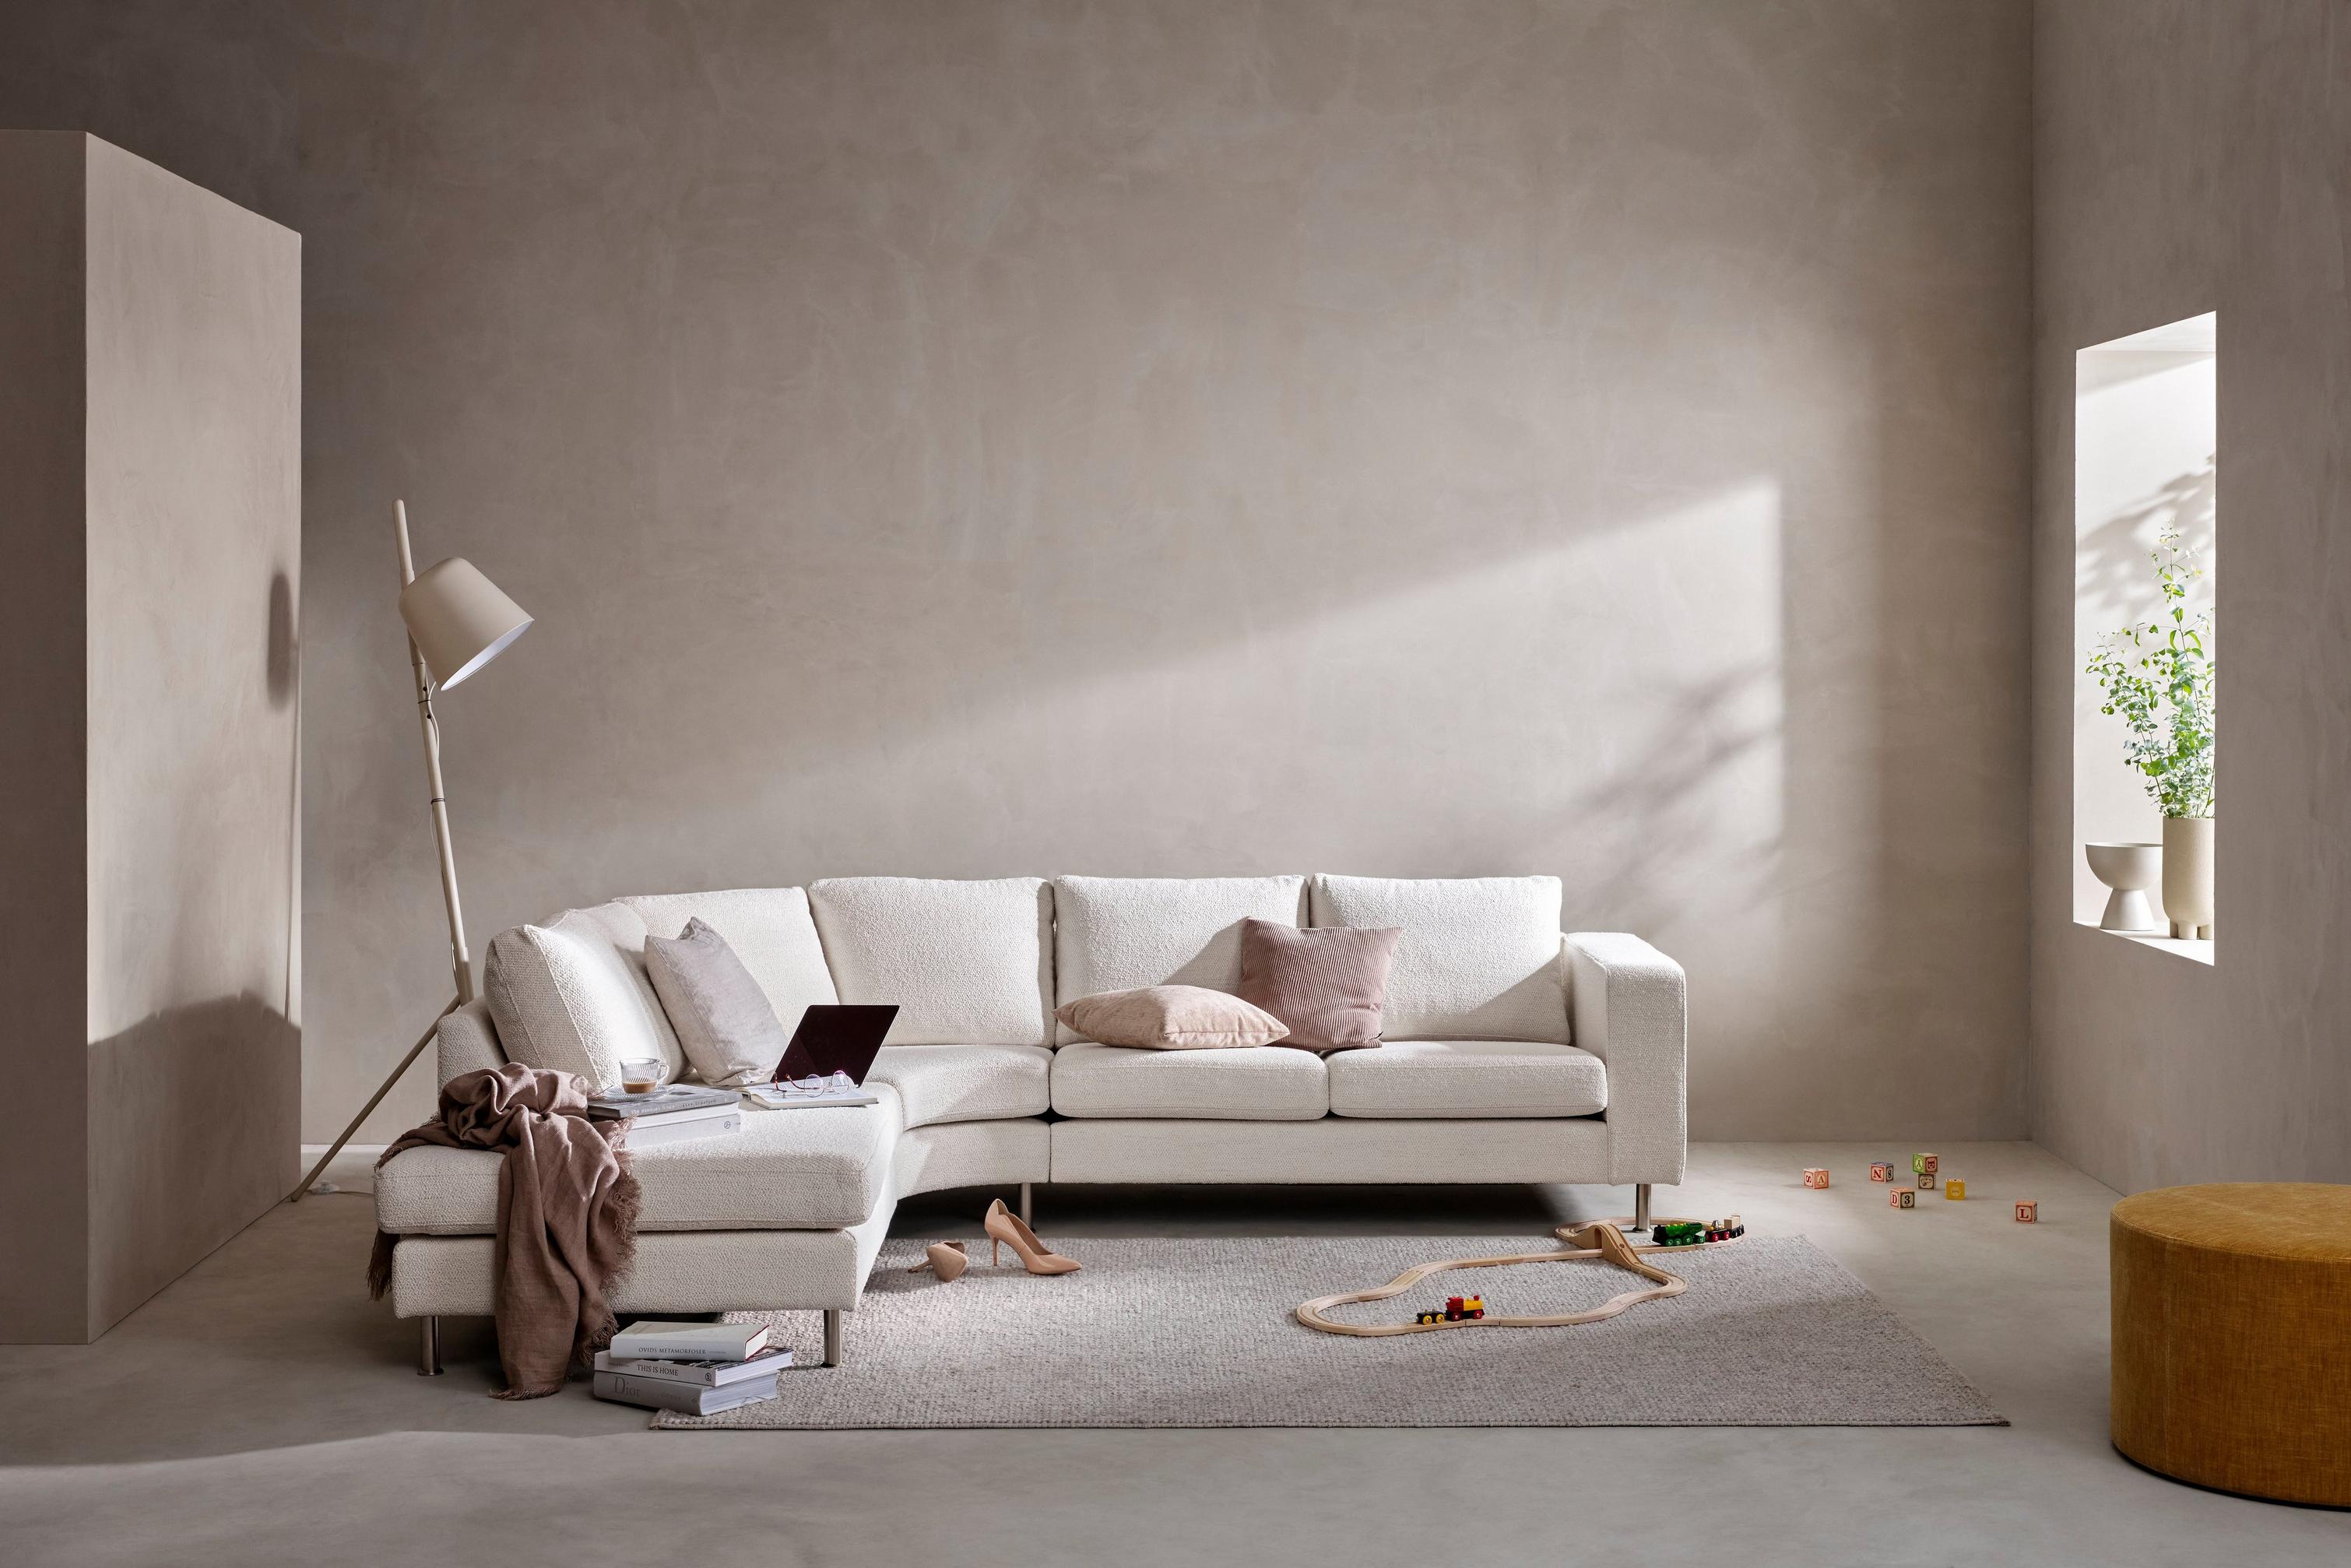 Indivi sofa placed in a small grayish room.